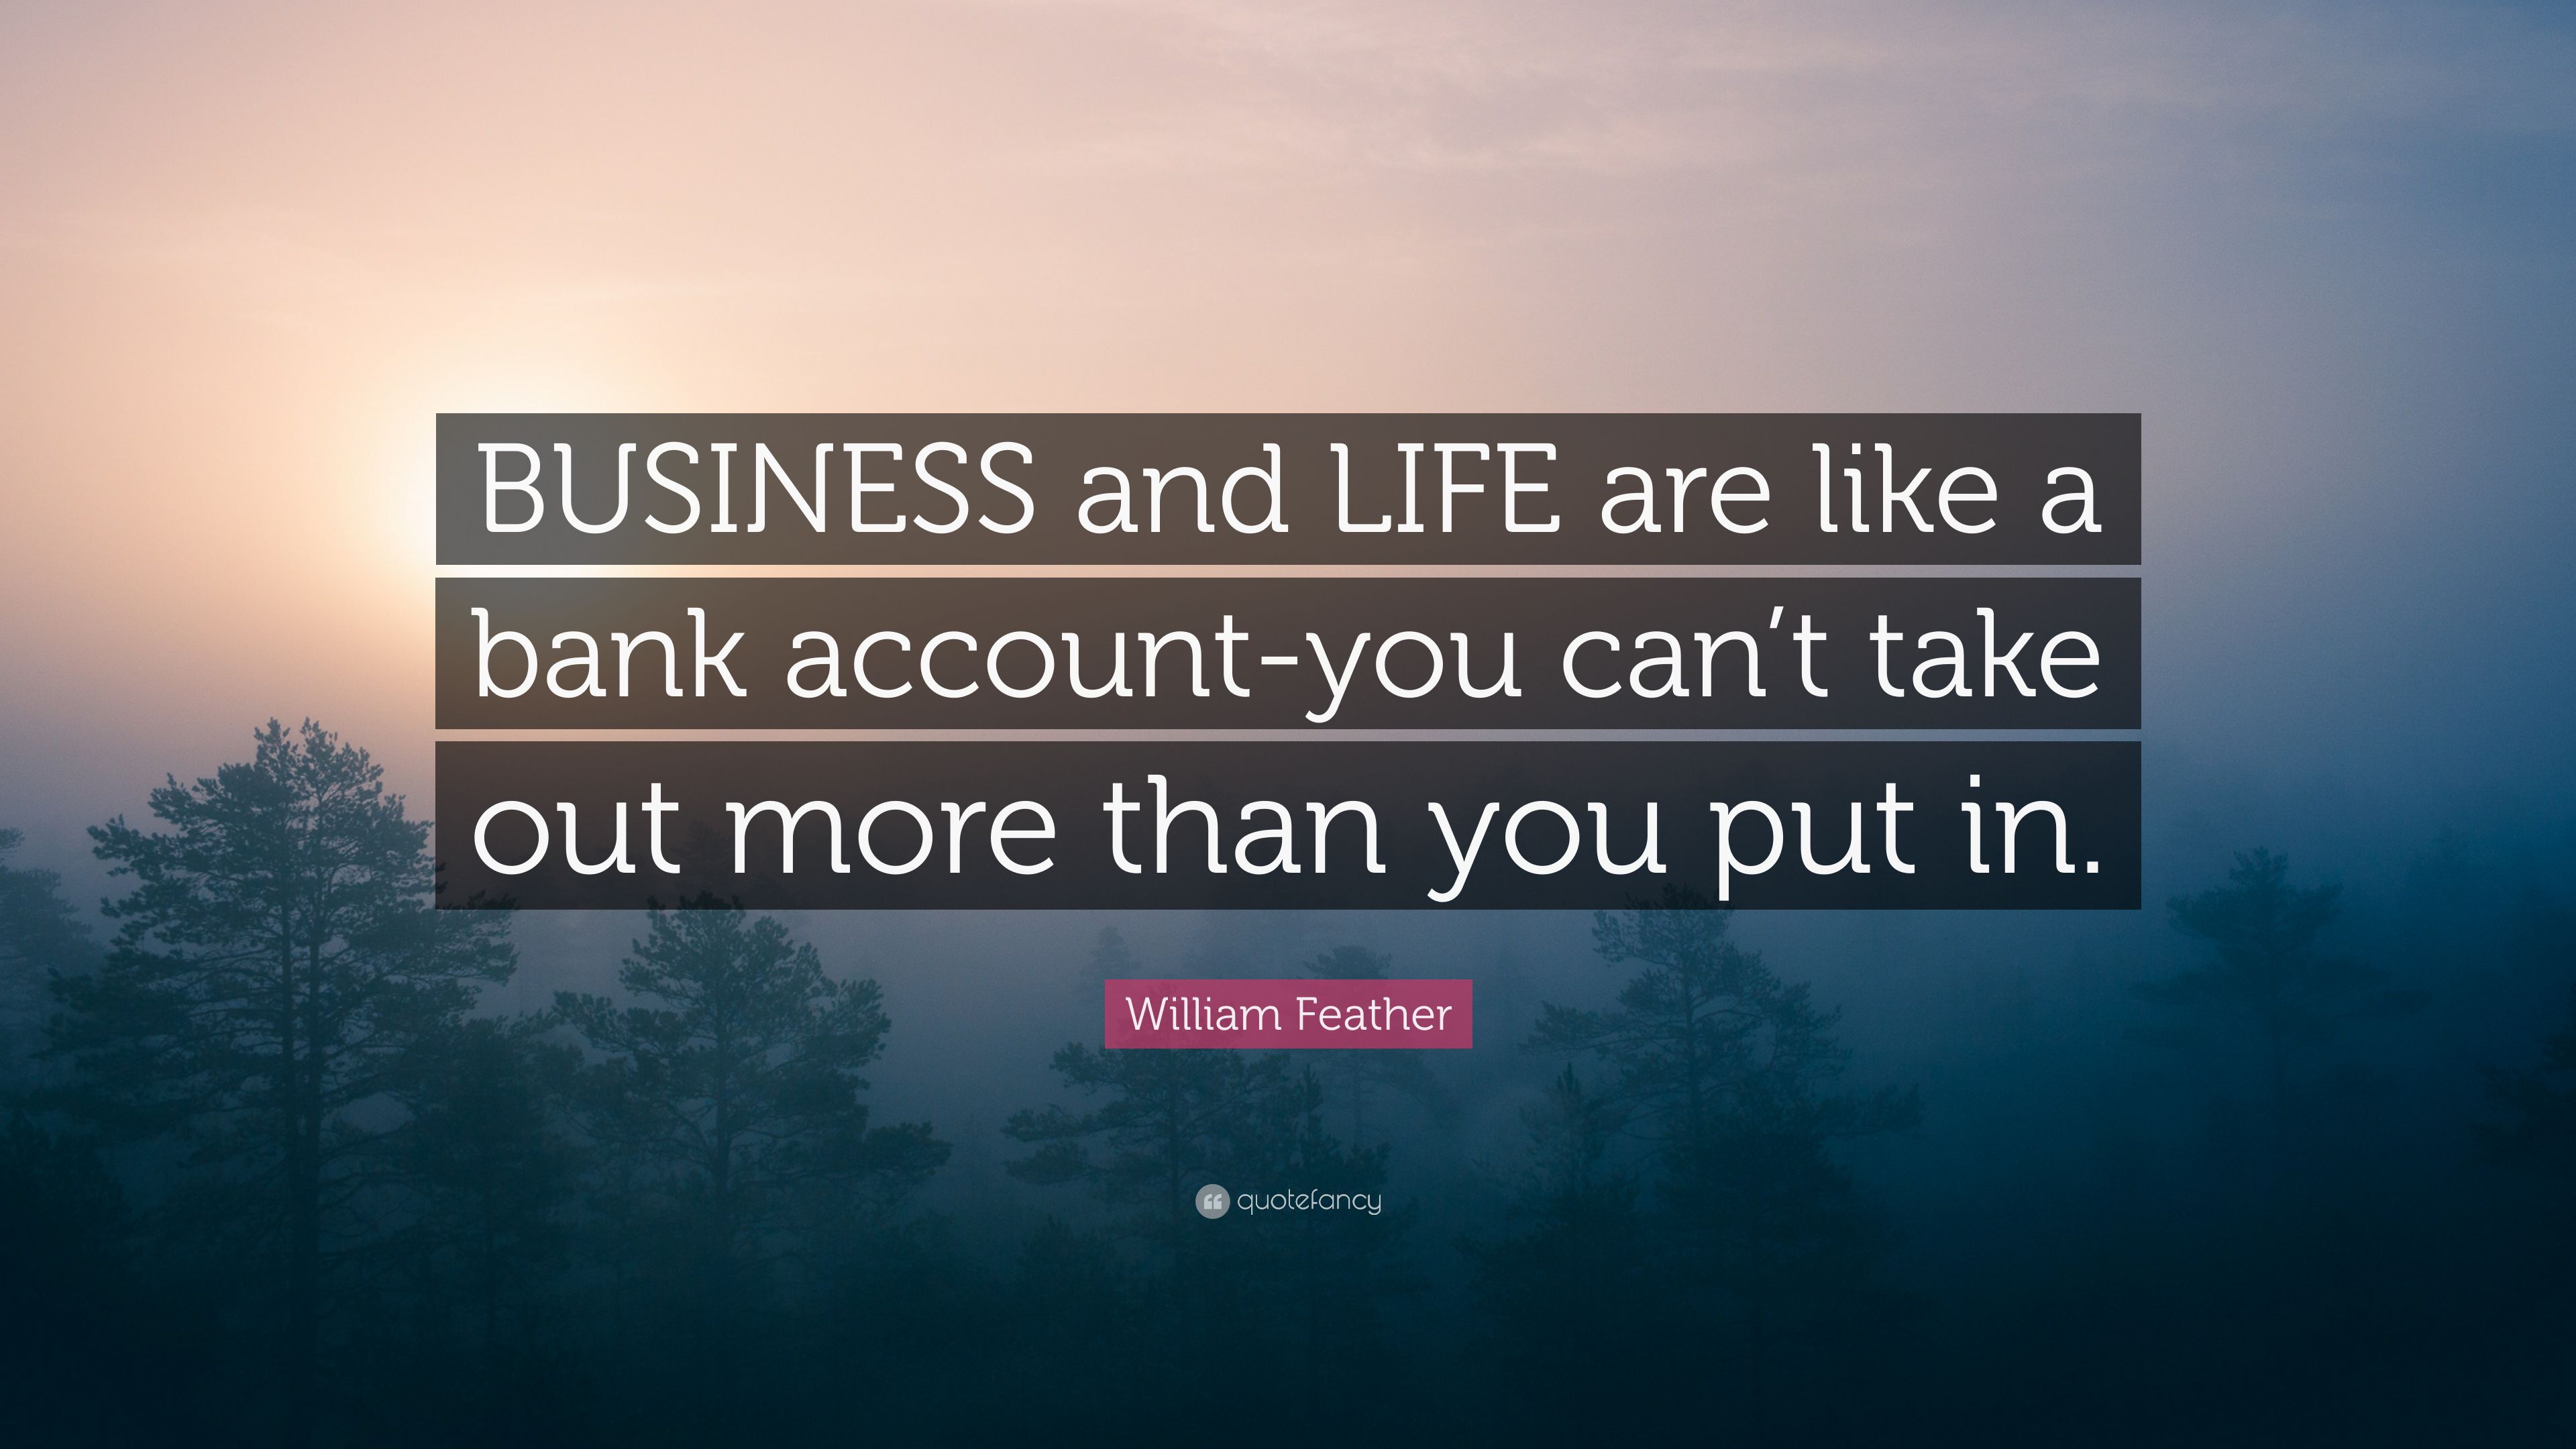 William Feather Quote: "BUSINESS and ...quotefancy.